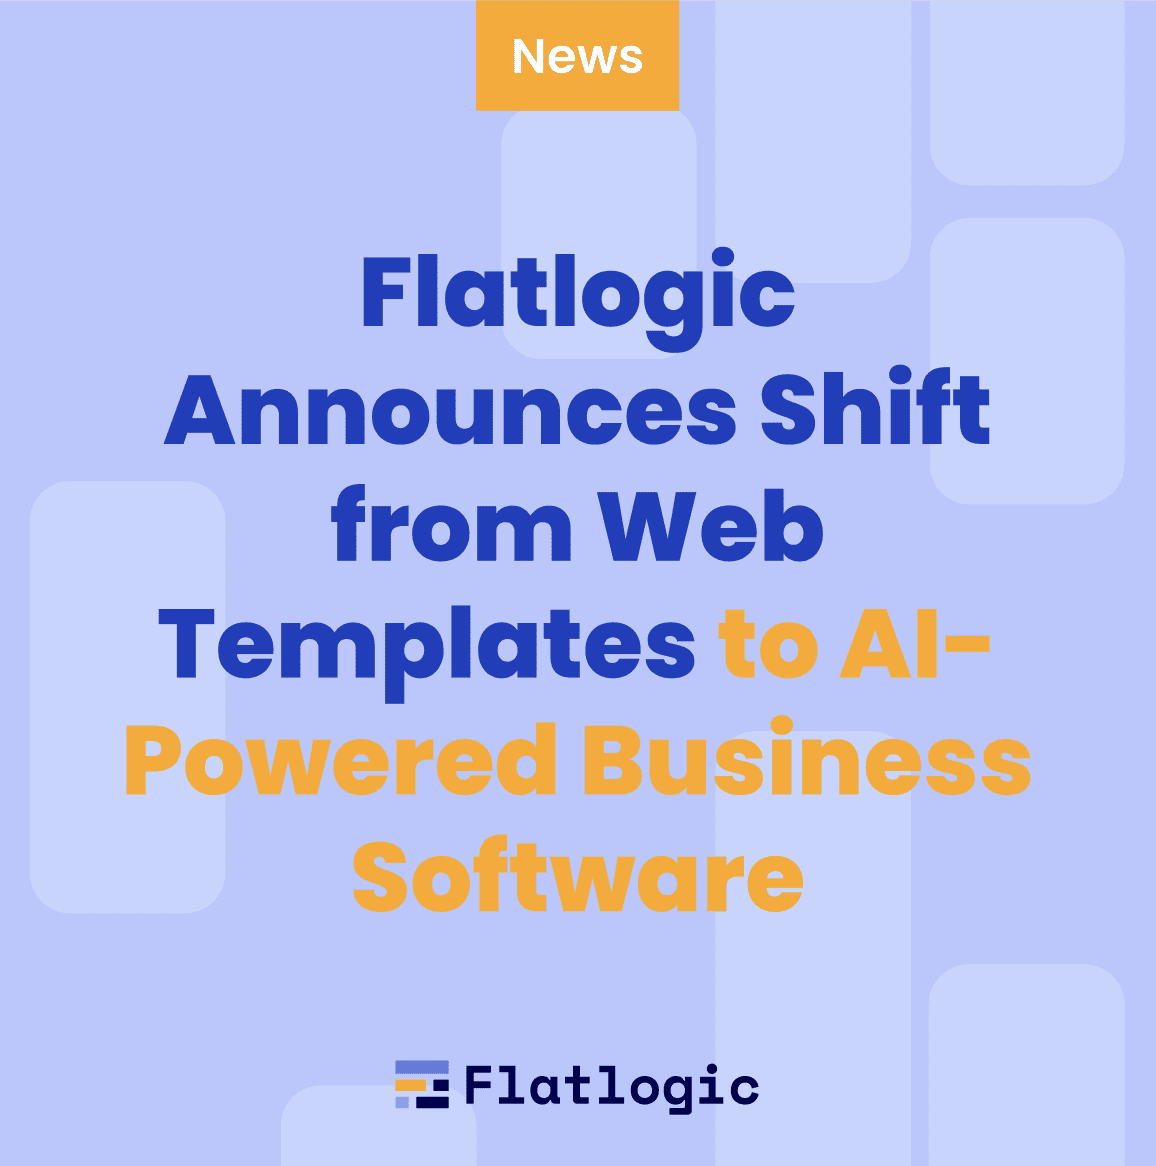 Flatlogic Announces Shift from Web Templates to AI-Powered Business Software